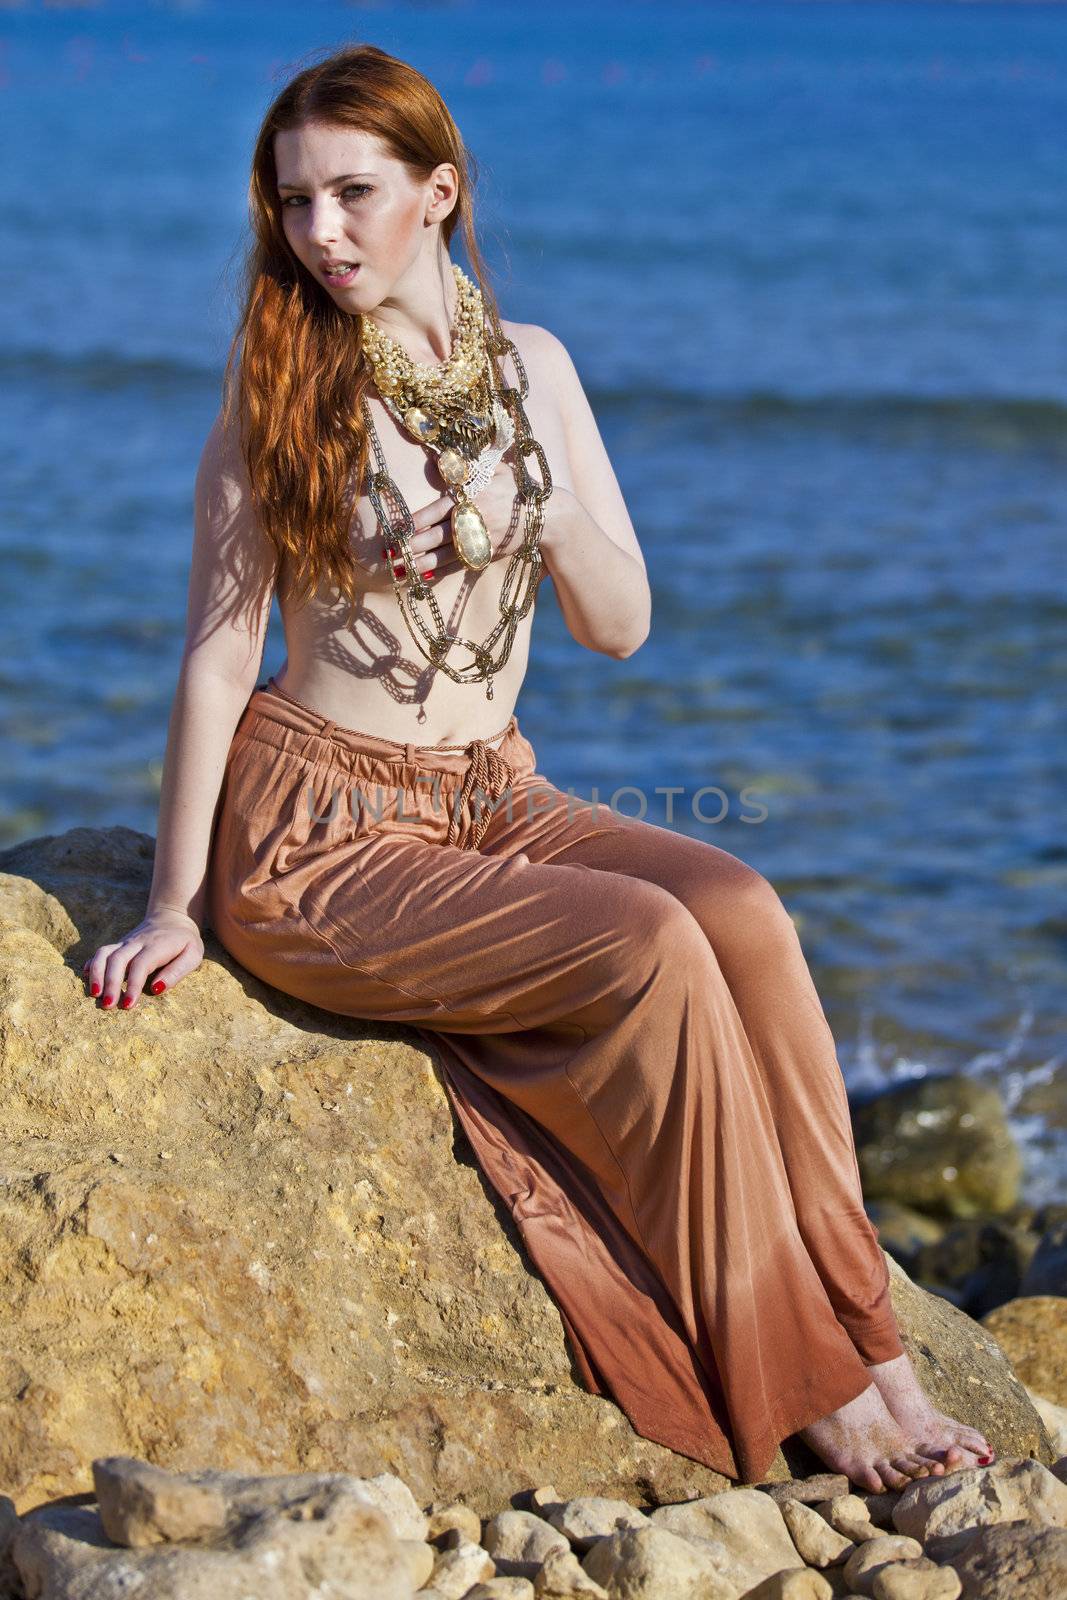 A Mermaid's Call by PhotoWorks